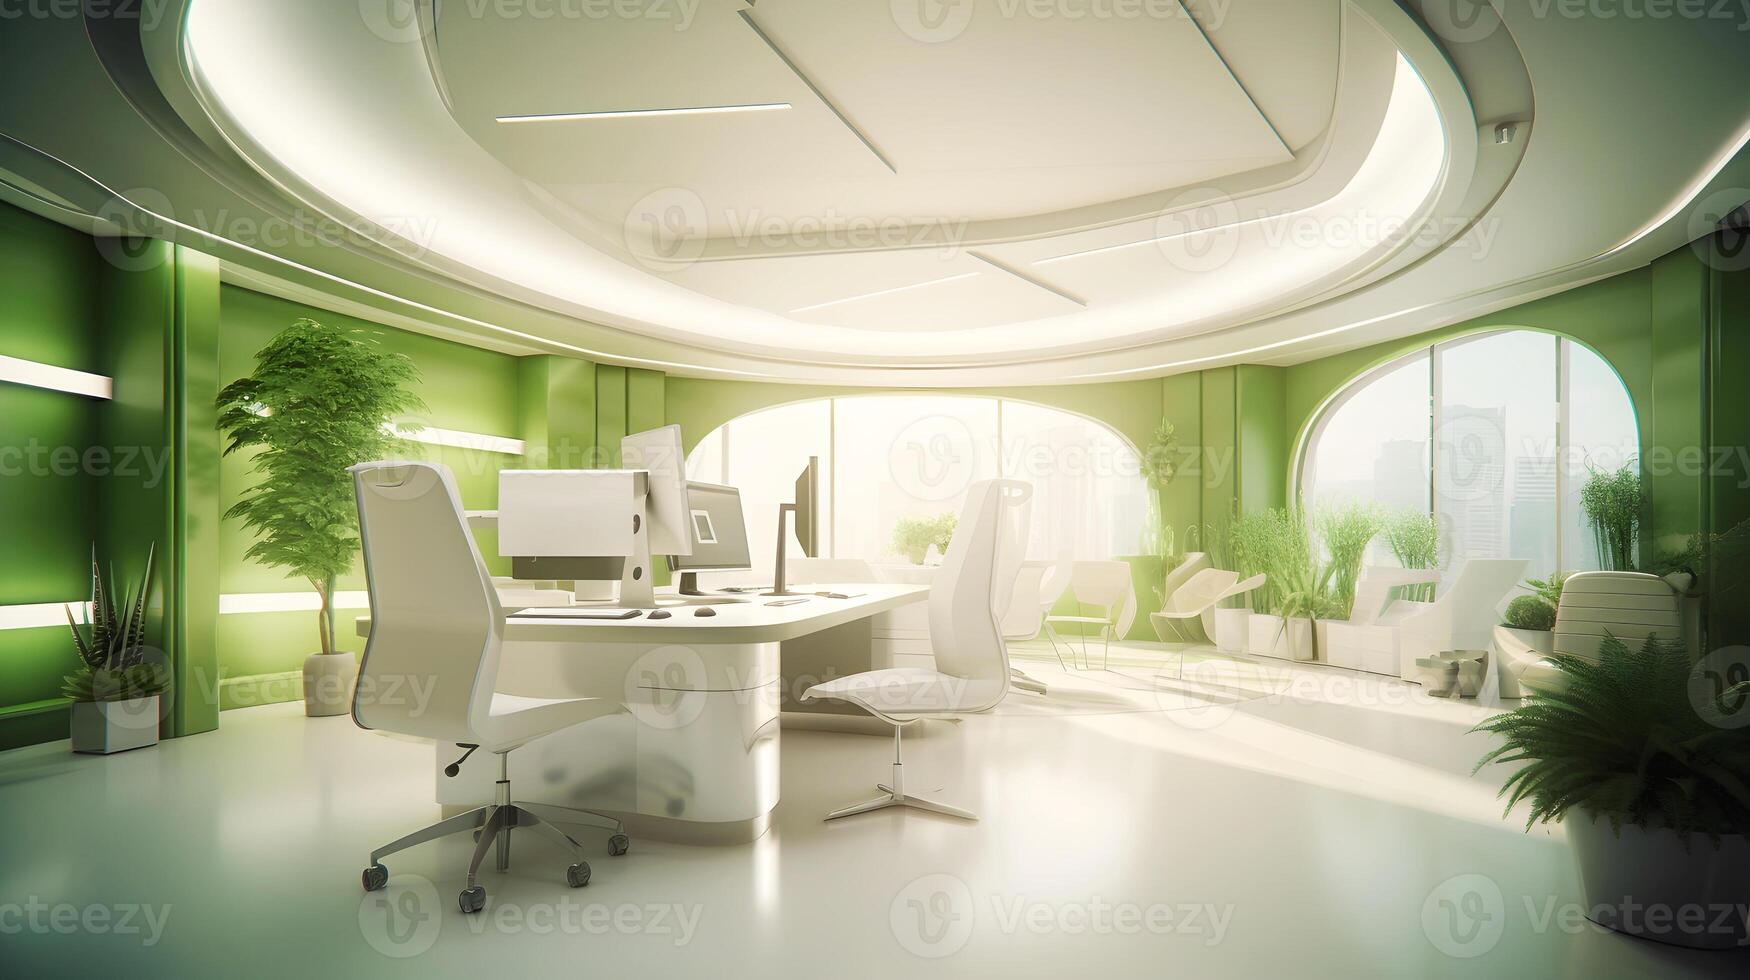 Modern futuristic interior office design with warm tones of green. Futuristic conference room interior. Workplace and corporate concept. 3d rendering, illustration photo